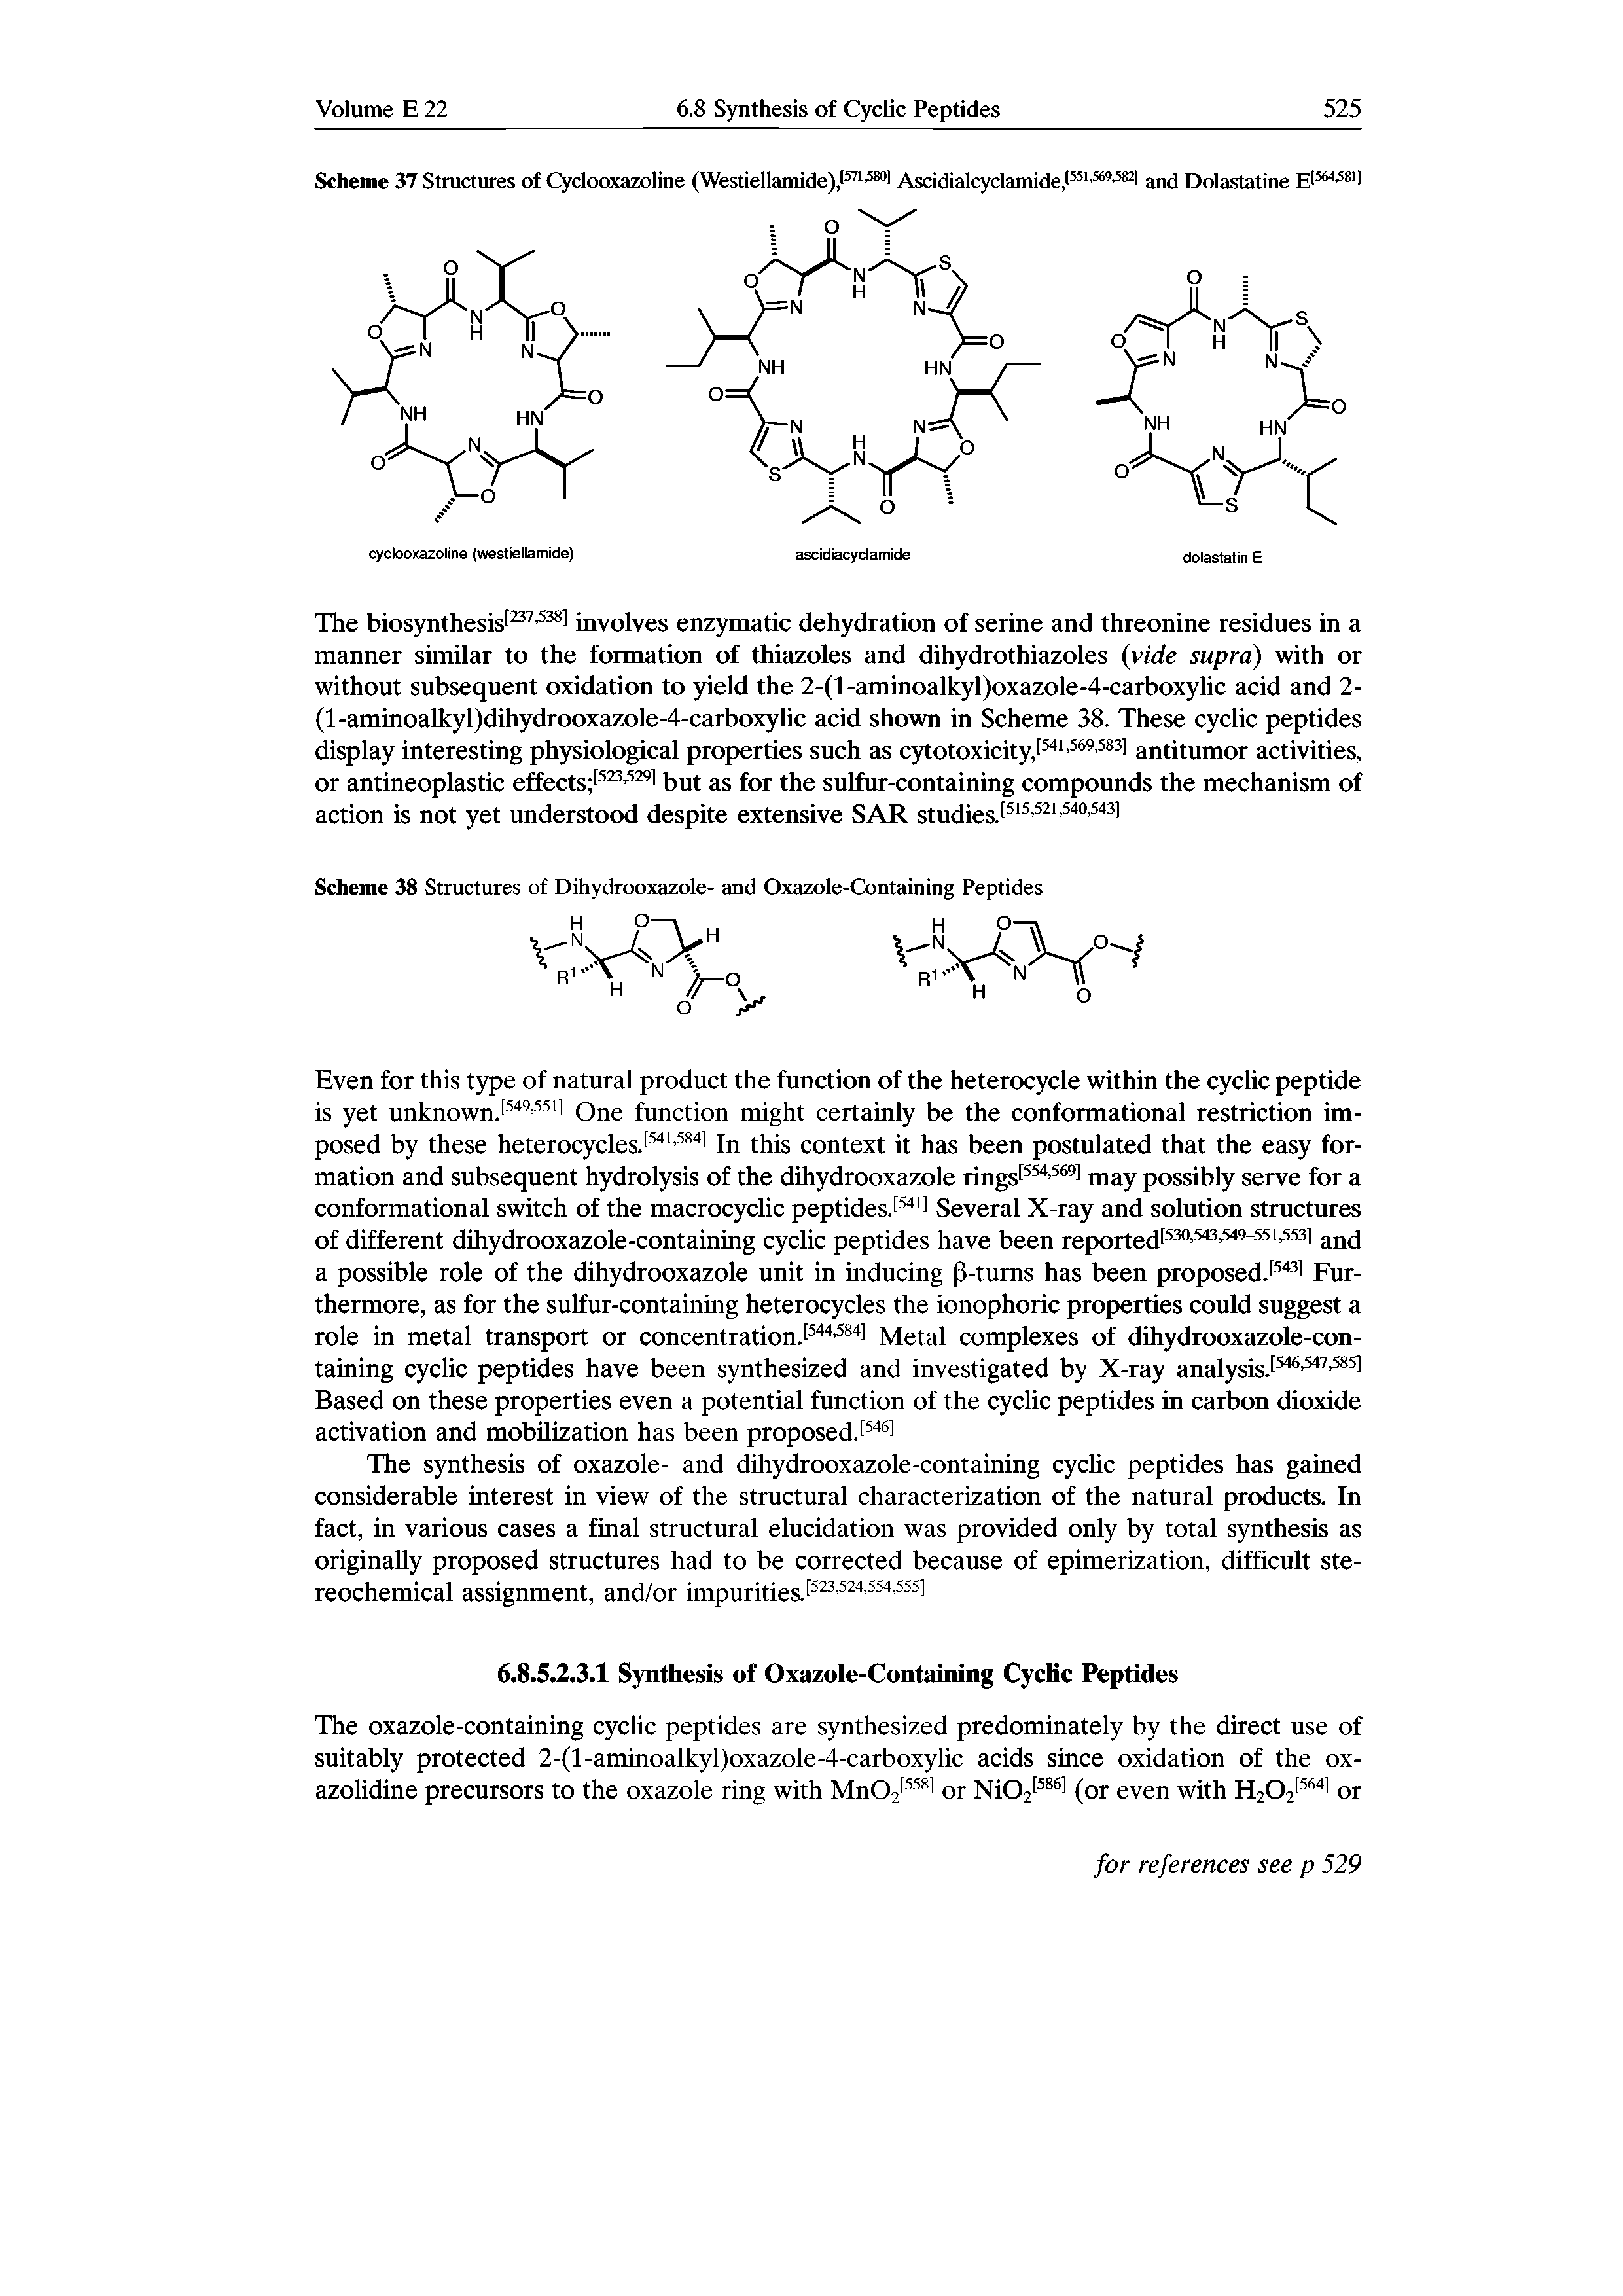 Scheme 38 Structures of Dihydrooxazole- and Oxazole-Containing Peptides...